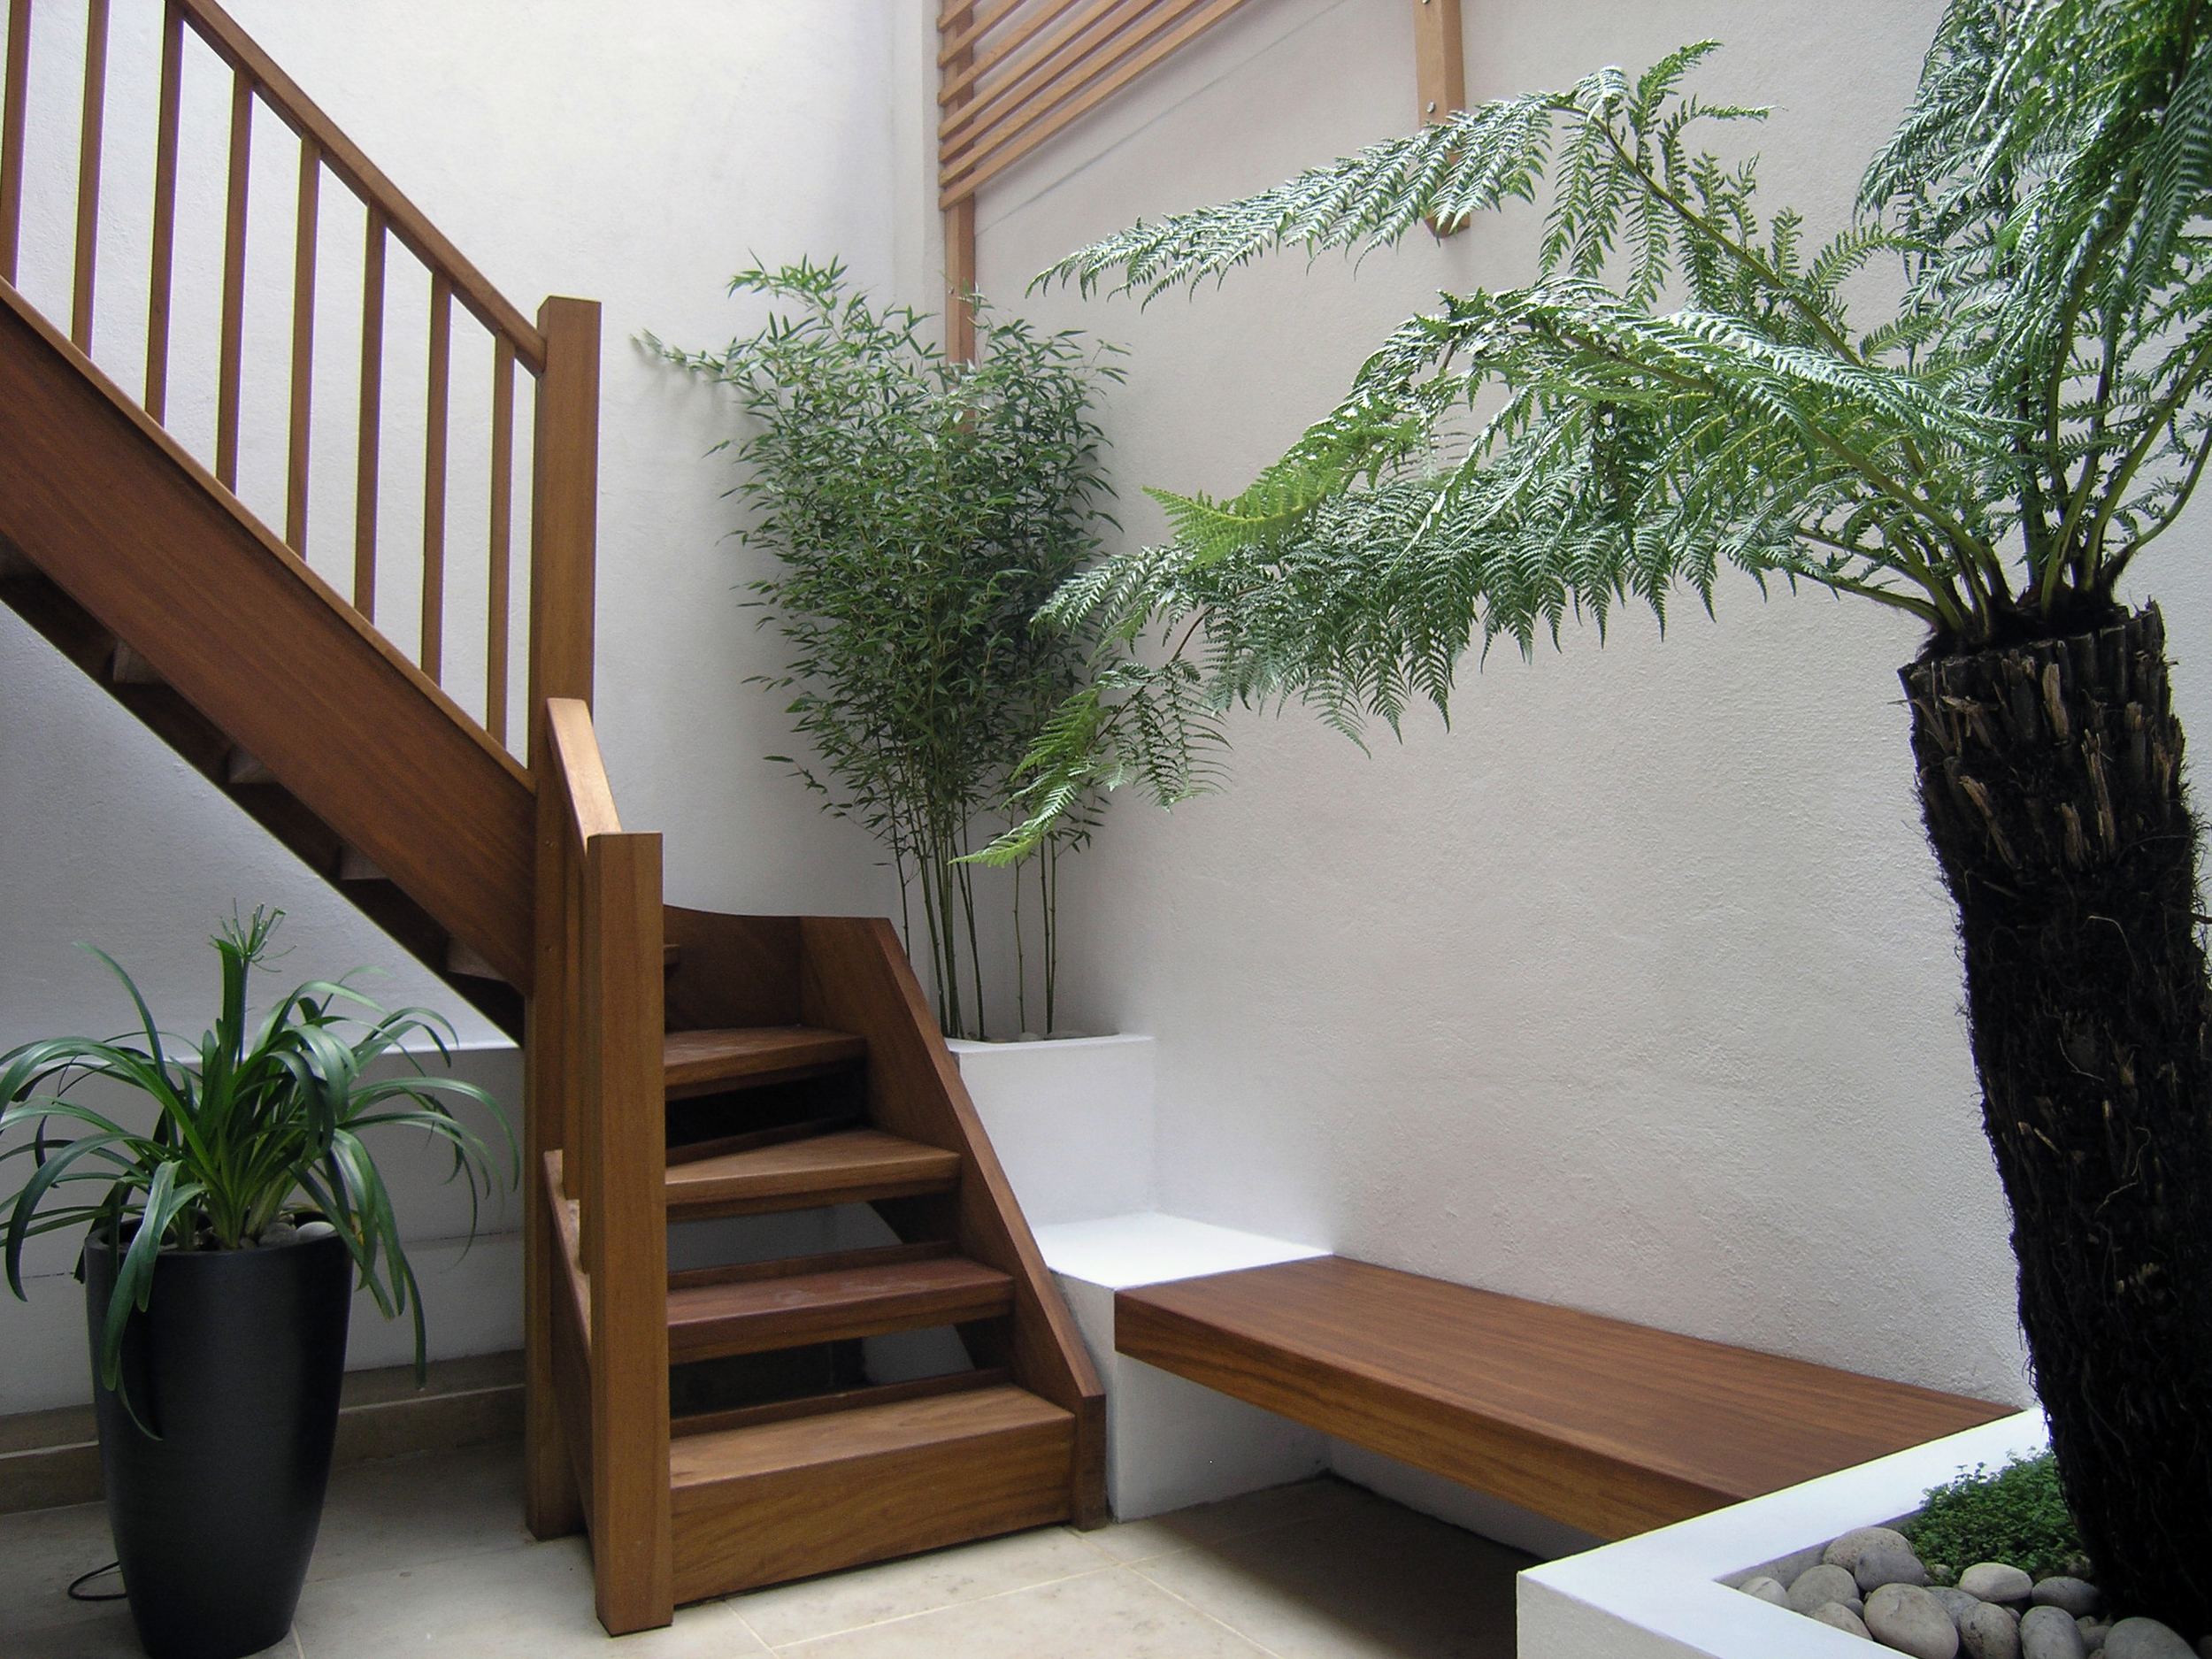 Bespoke iroko staircase and plants transform shady courtyard in N1